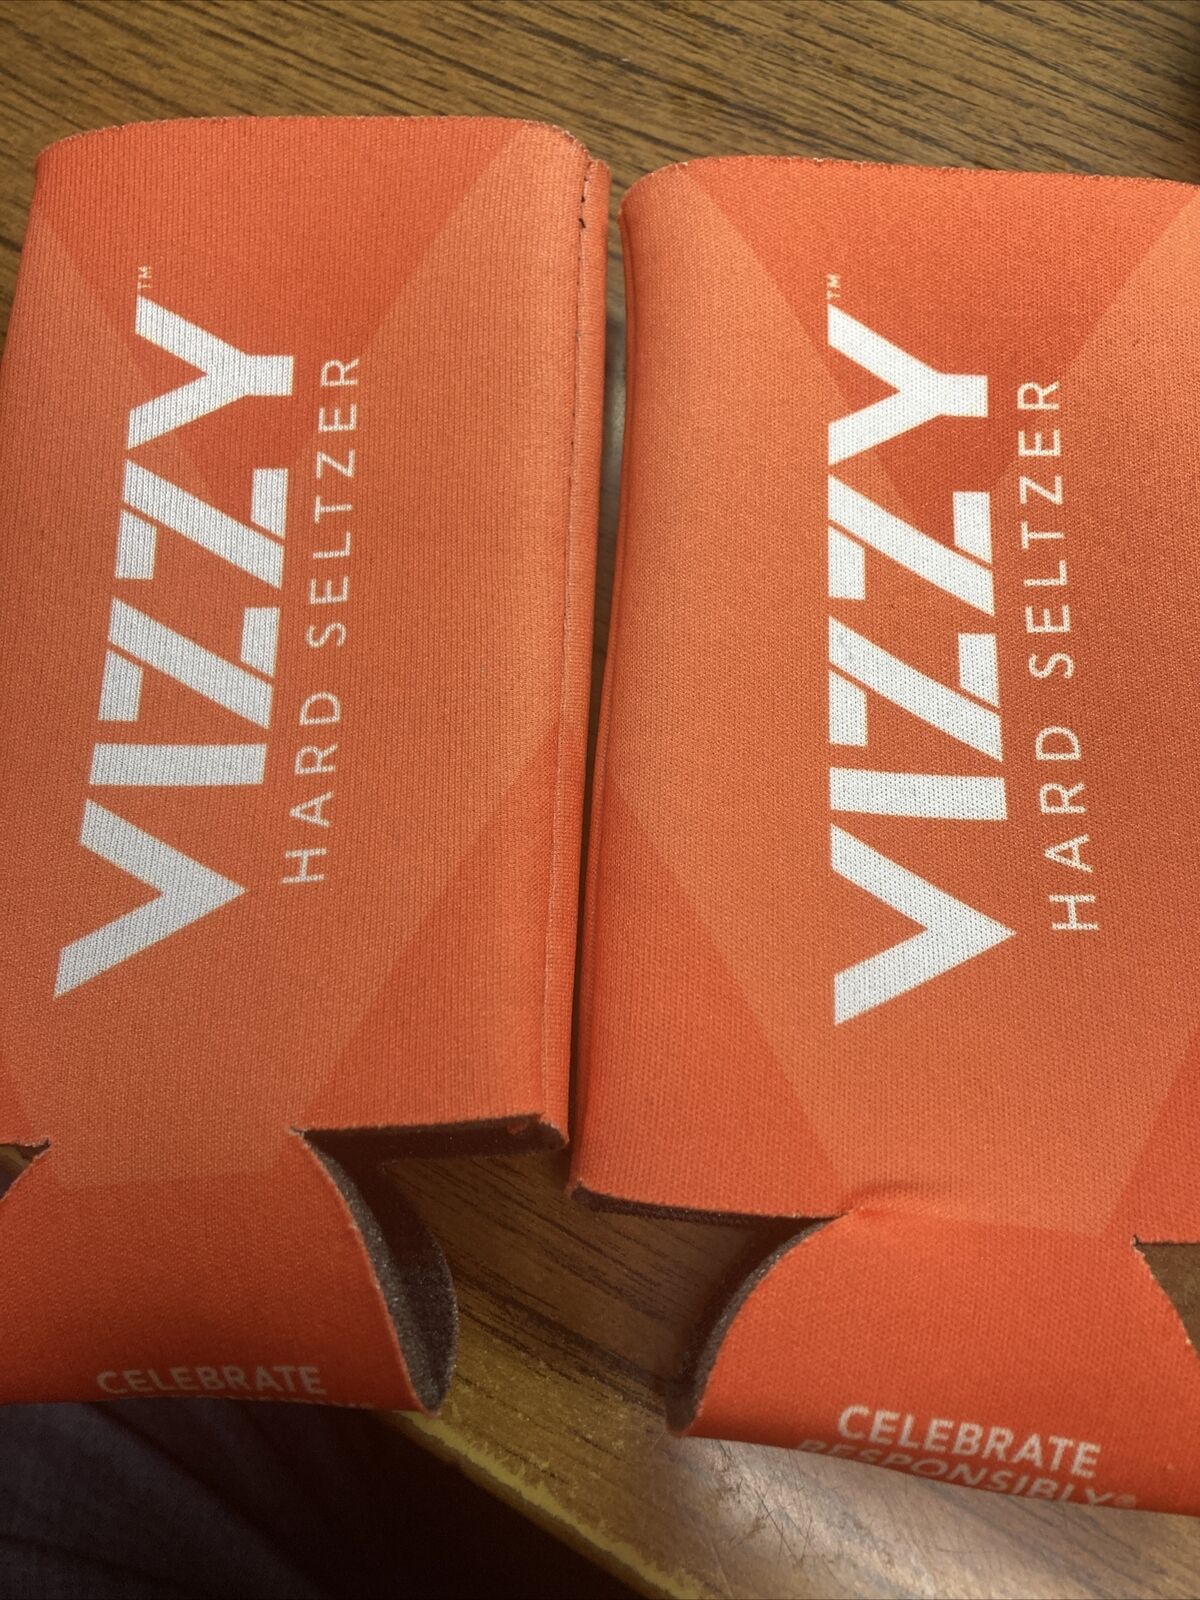 Lot of 6 VIZZY Hard Seltzer Antioxidant Can Coozie Koozie Cozy Cooler